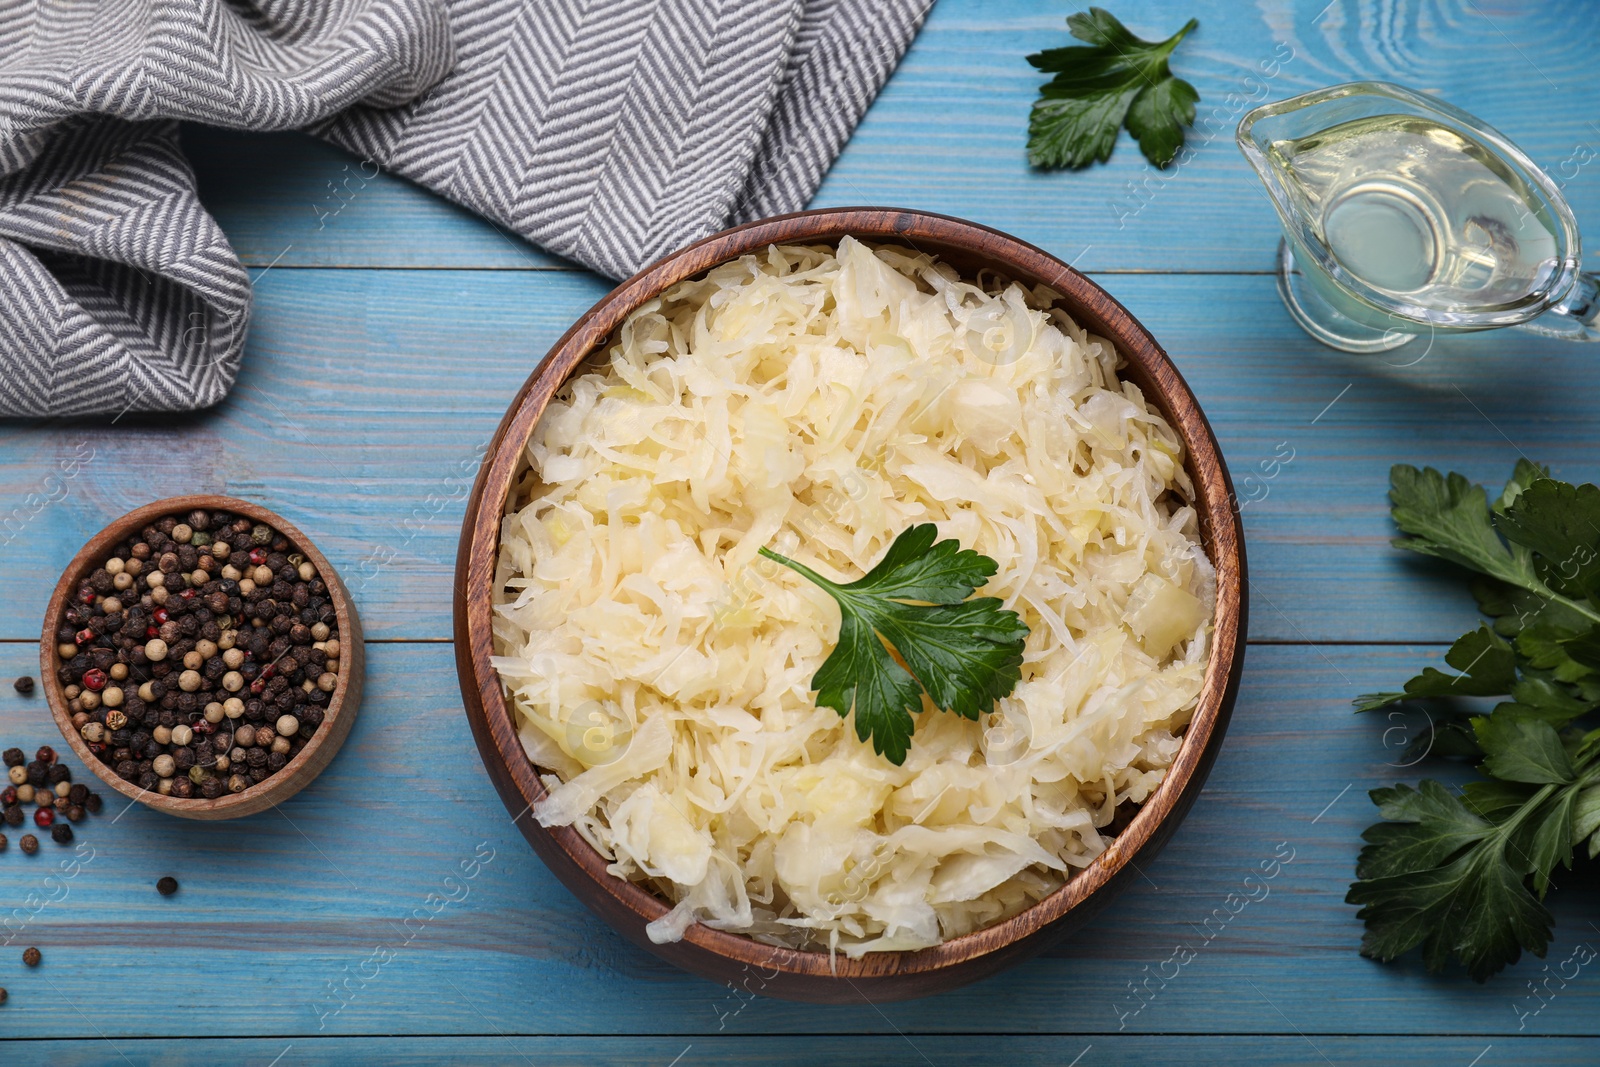 Photo of Bowl of tasty sauerkraut and ingredients on light blue wooden table, flat lay